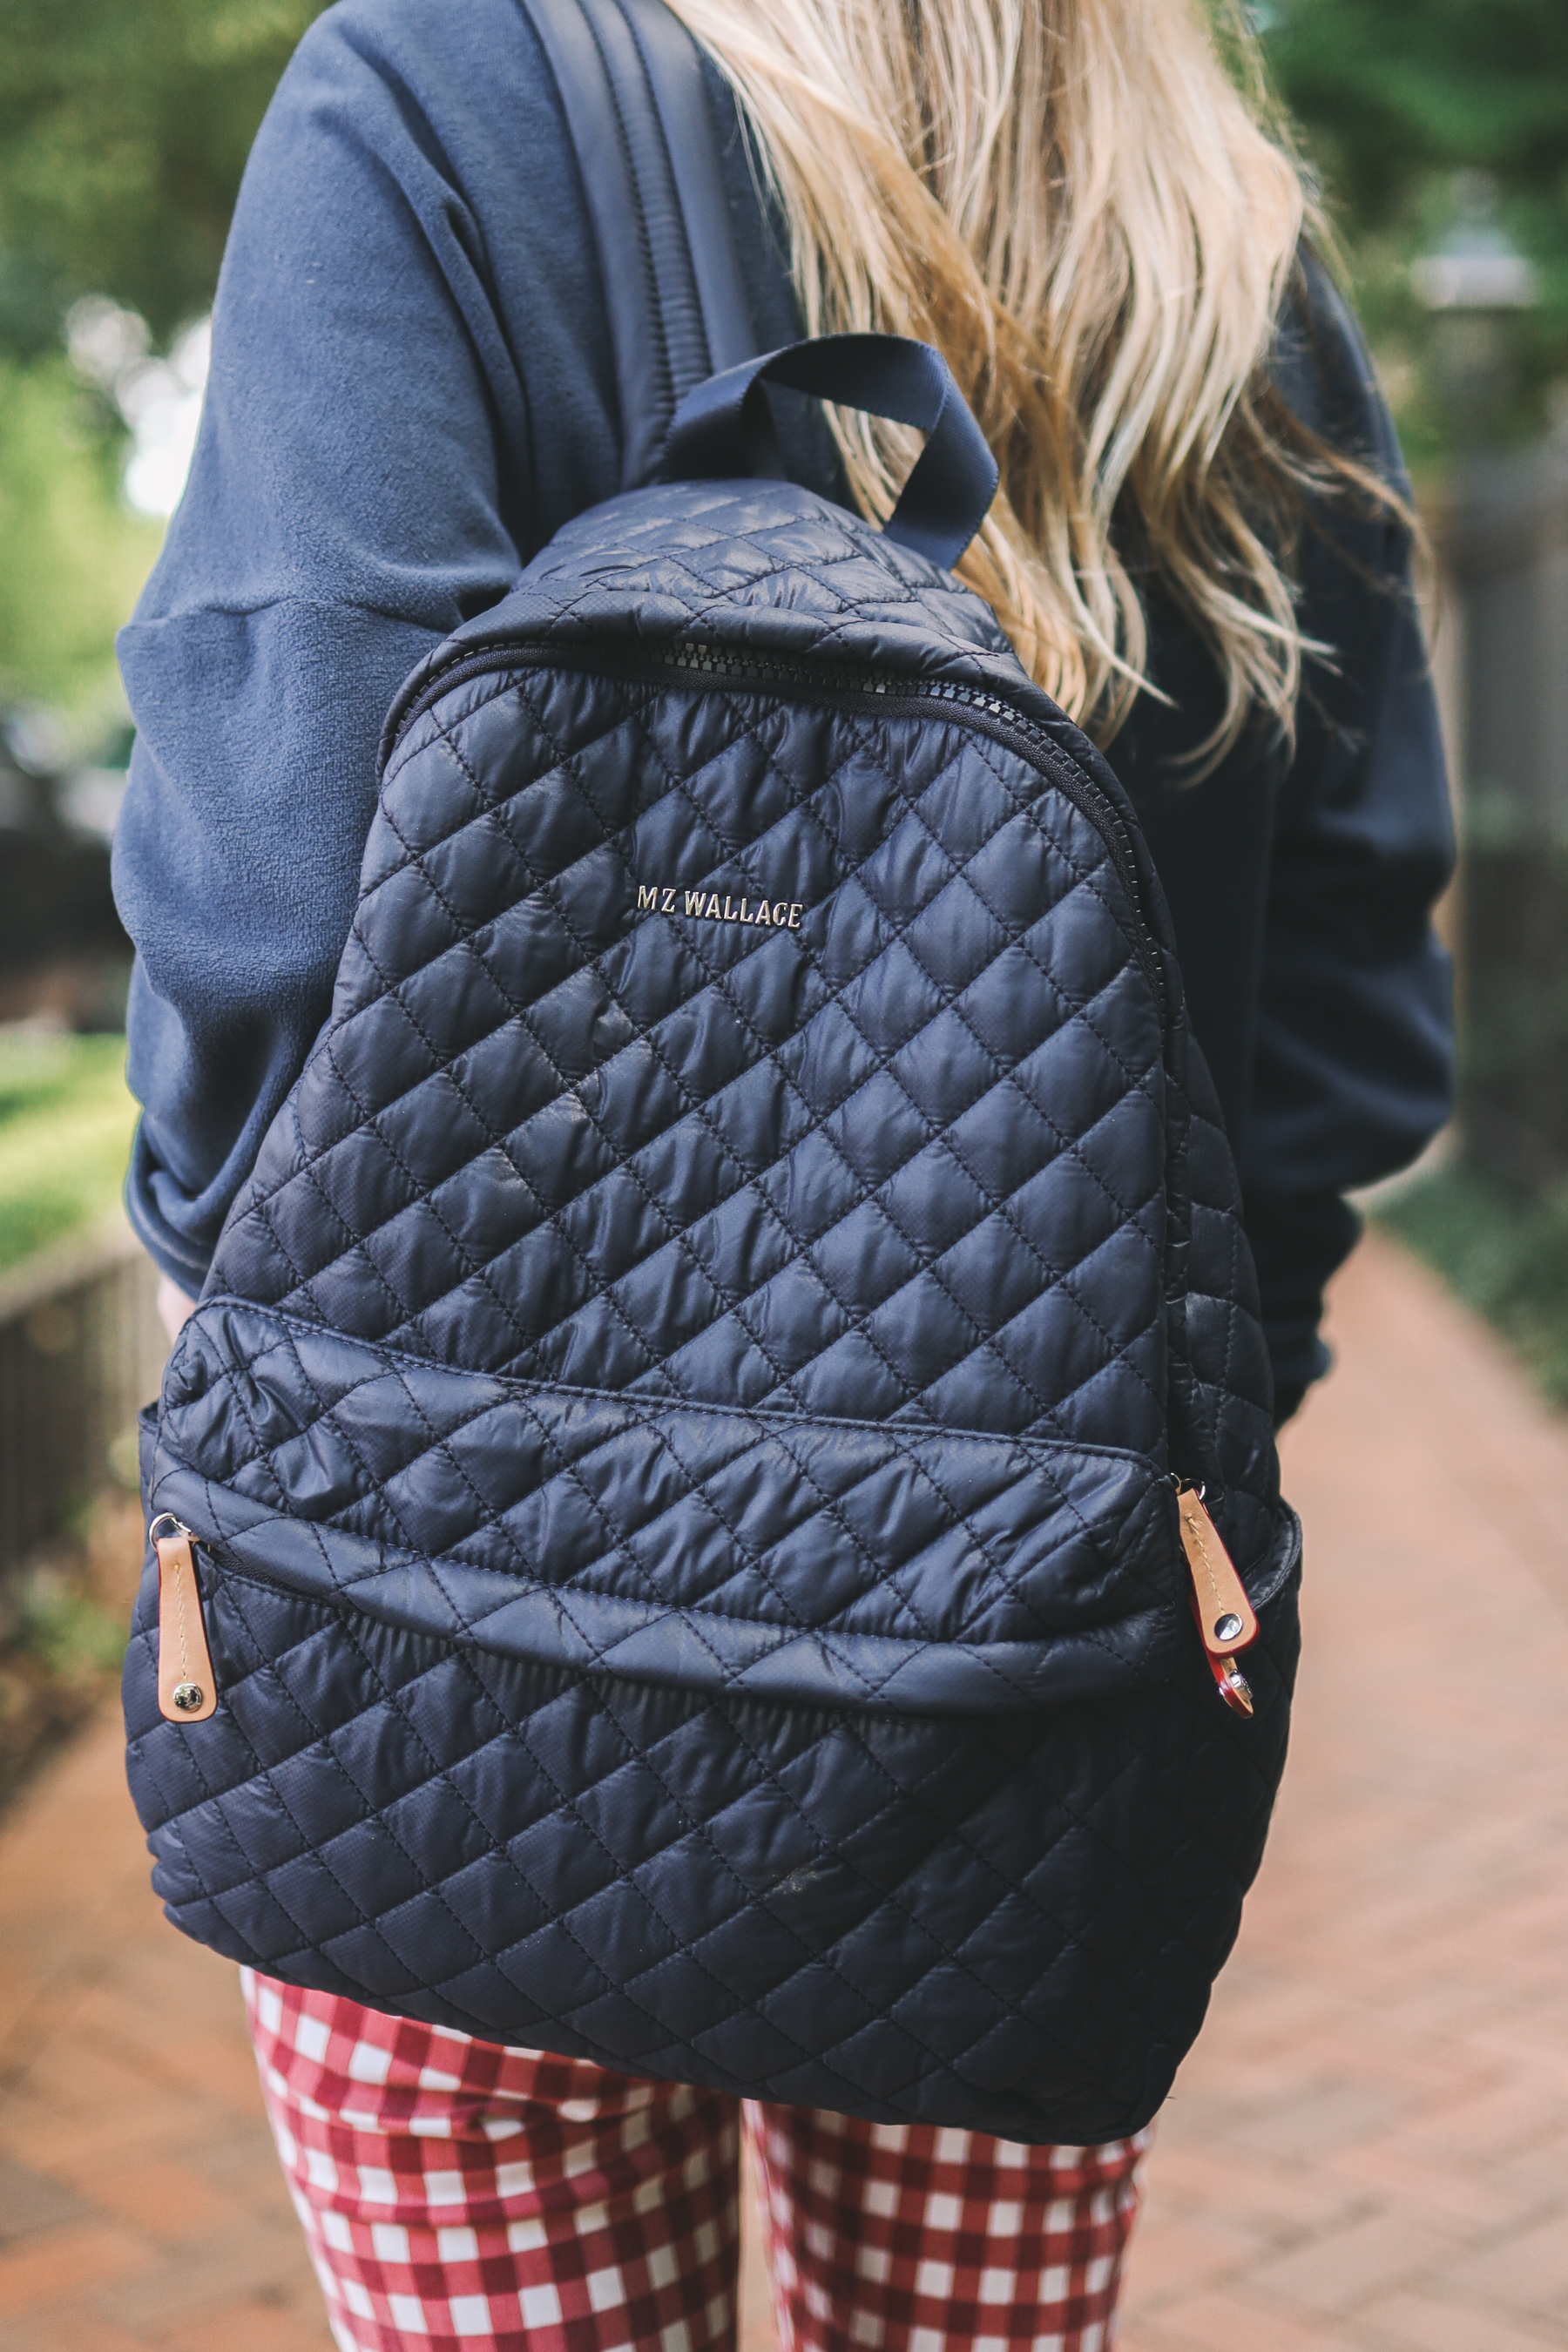 MZ Wallace Metro Backpack Kelly in the City Lifestyle Blog